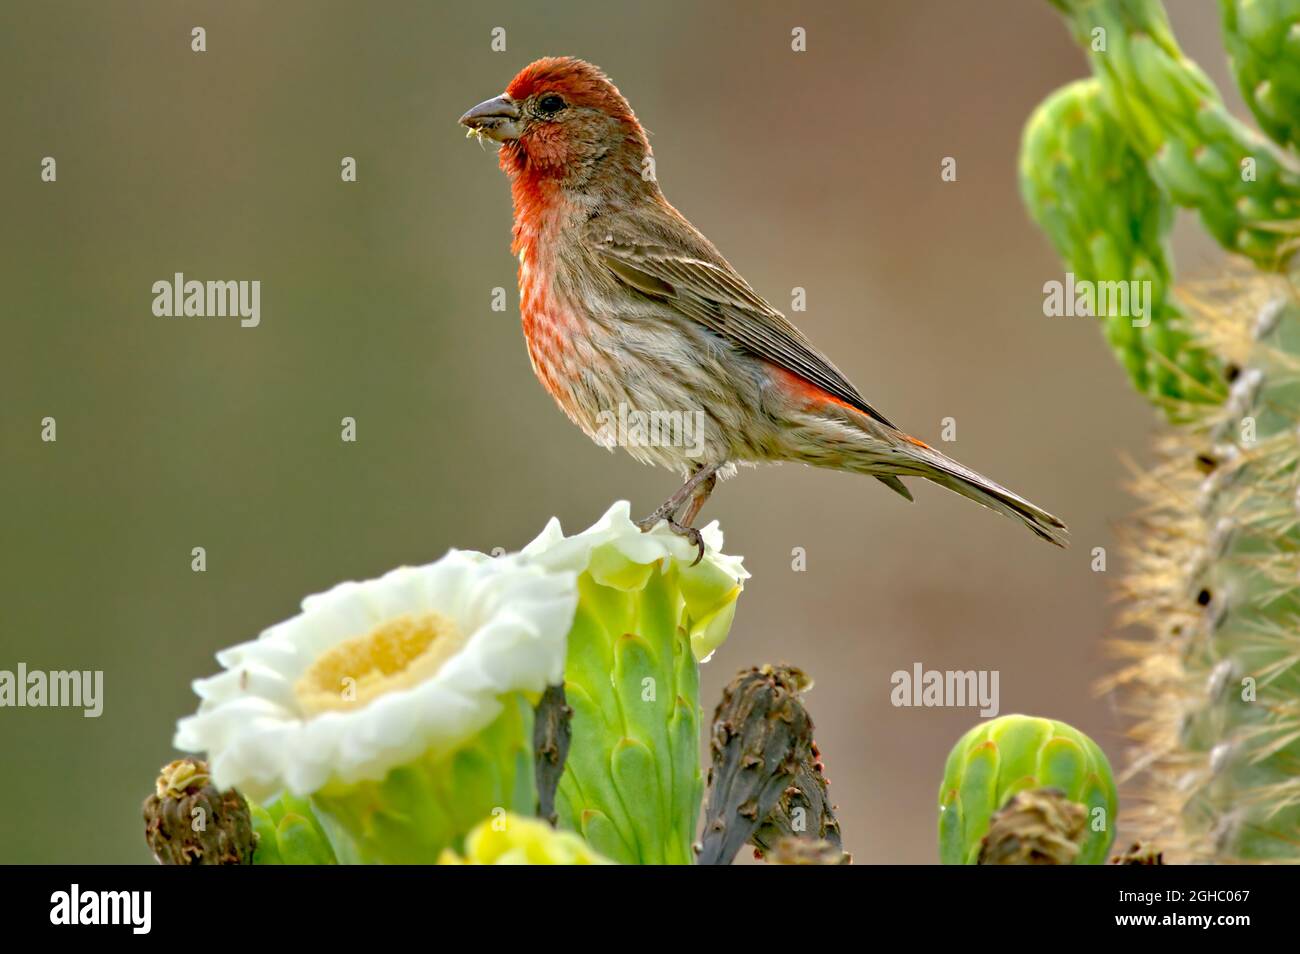 A male House Finch native to Arizona perched on the flower of a Saguaro Cactus. Species Carpodacus Mexicanus, family Fringillidae. Stock Photo